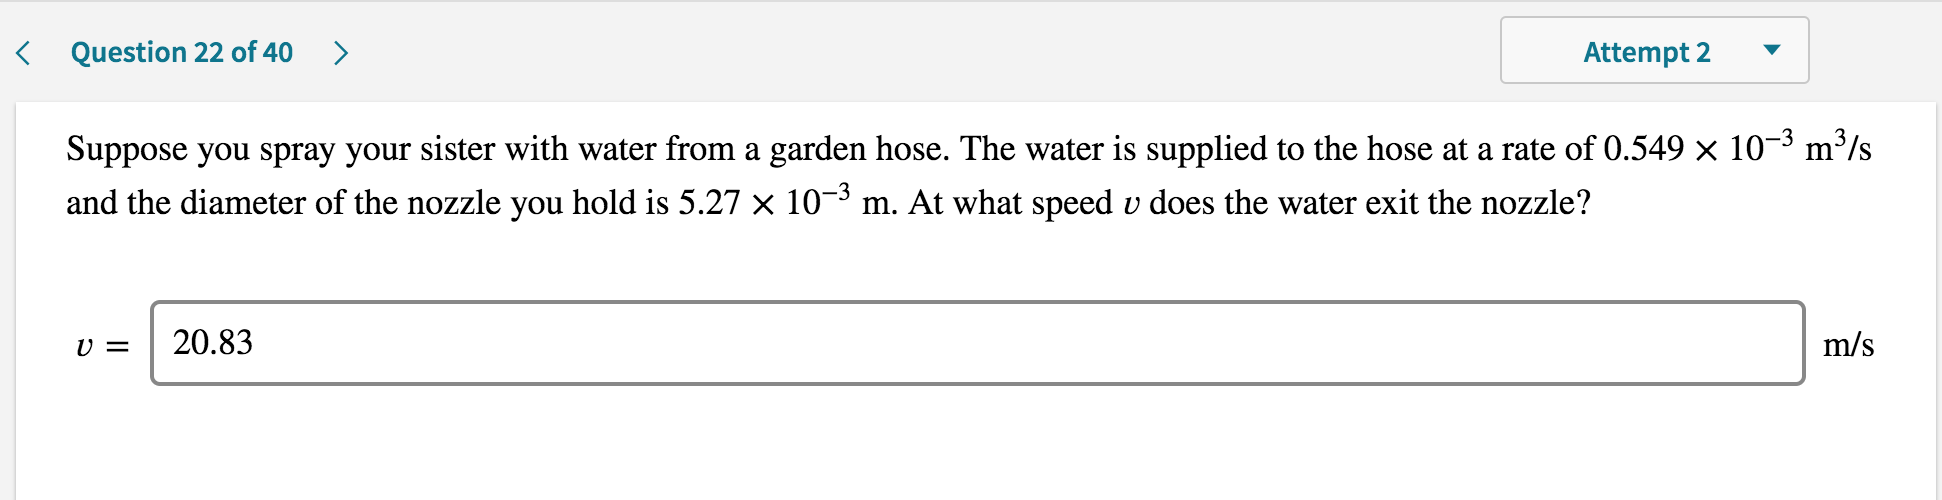 Suppose you spray your sister with water from a garden hose. The water is supplied to the hose at a rate of 0.549 × 10¬³ m²
/s
and the diameter of the nozzle you hold is 5.27 × 10¬³ m. At what speed v does the water exit the nozzle?
